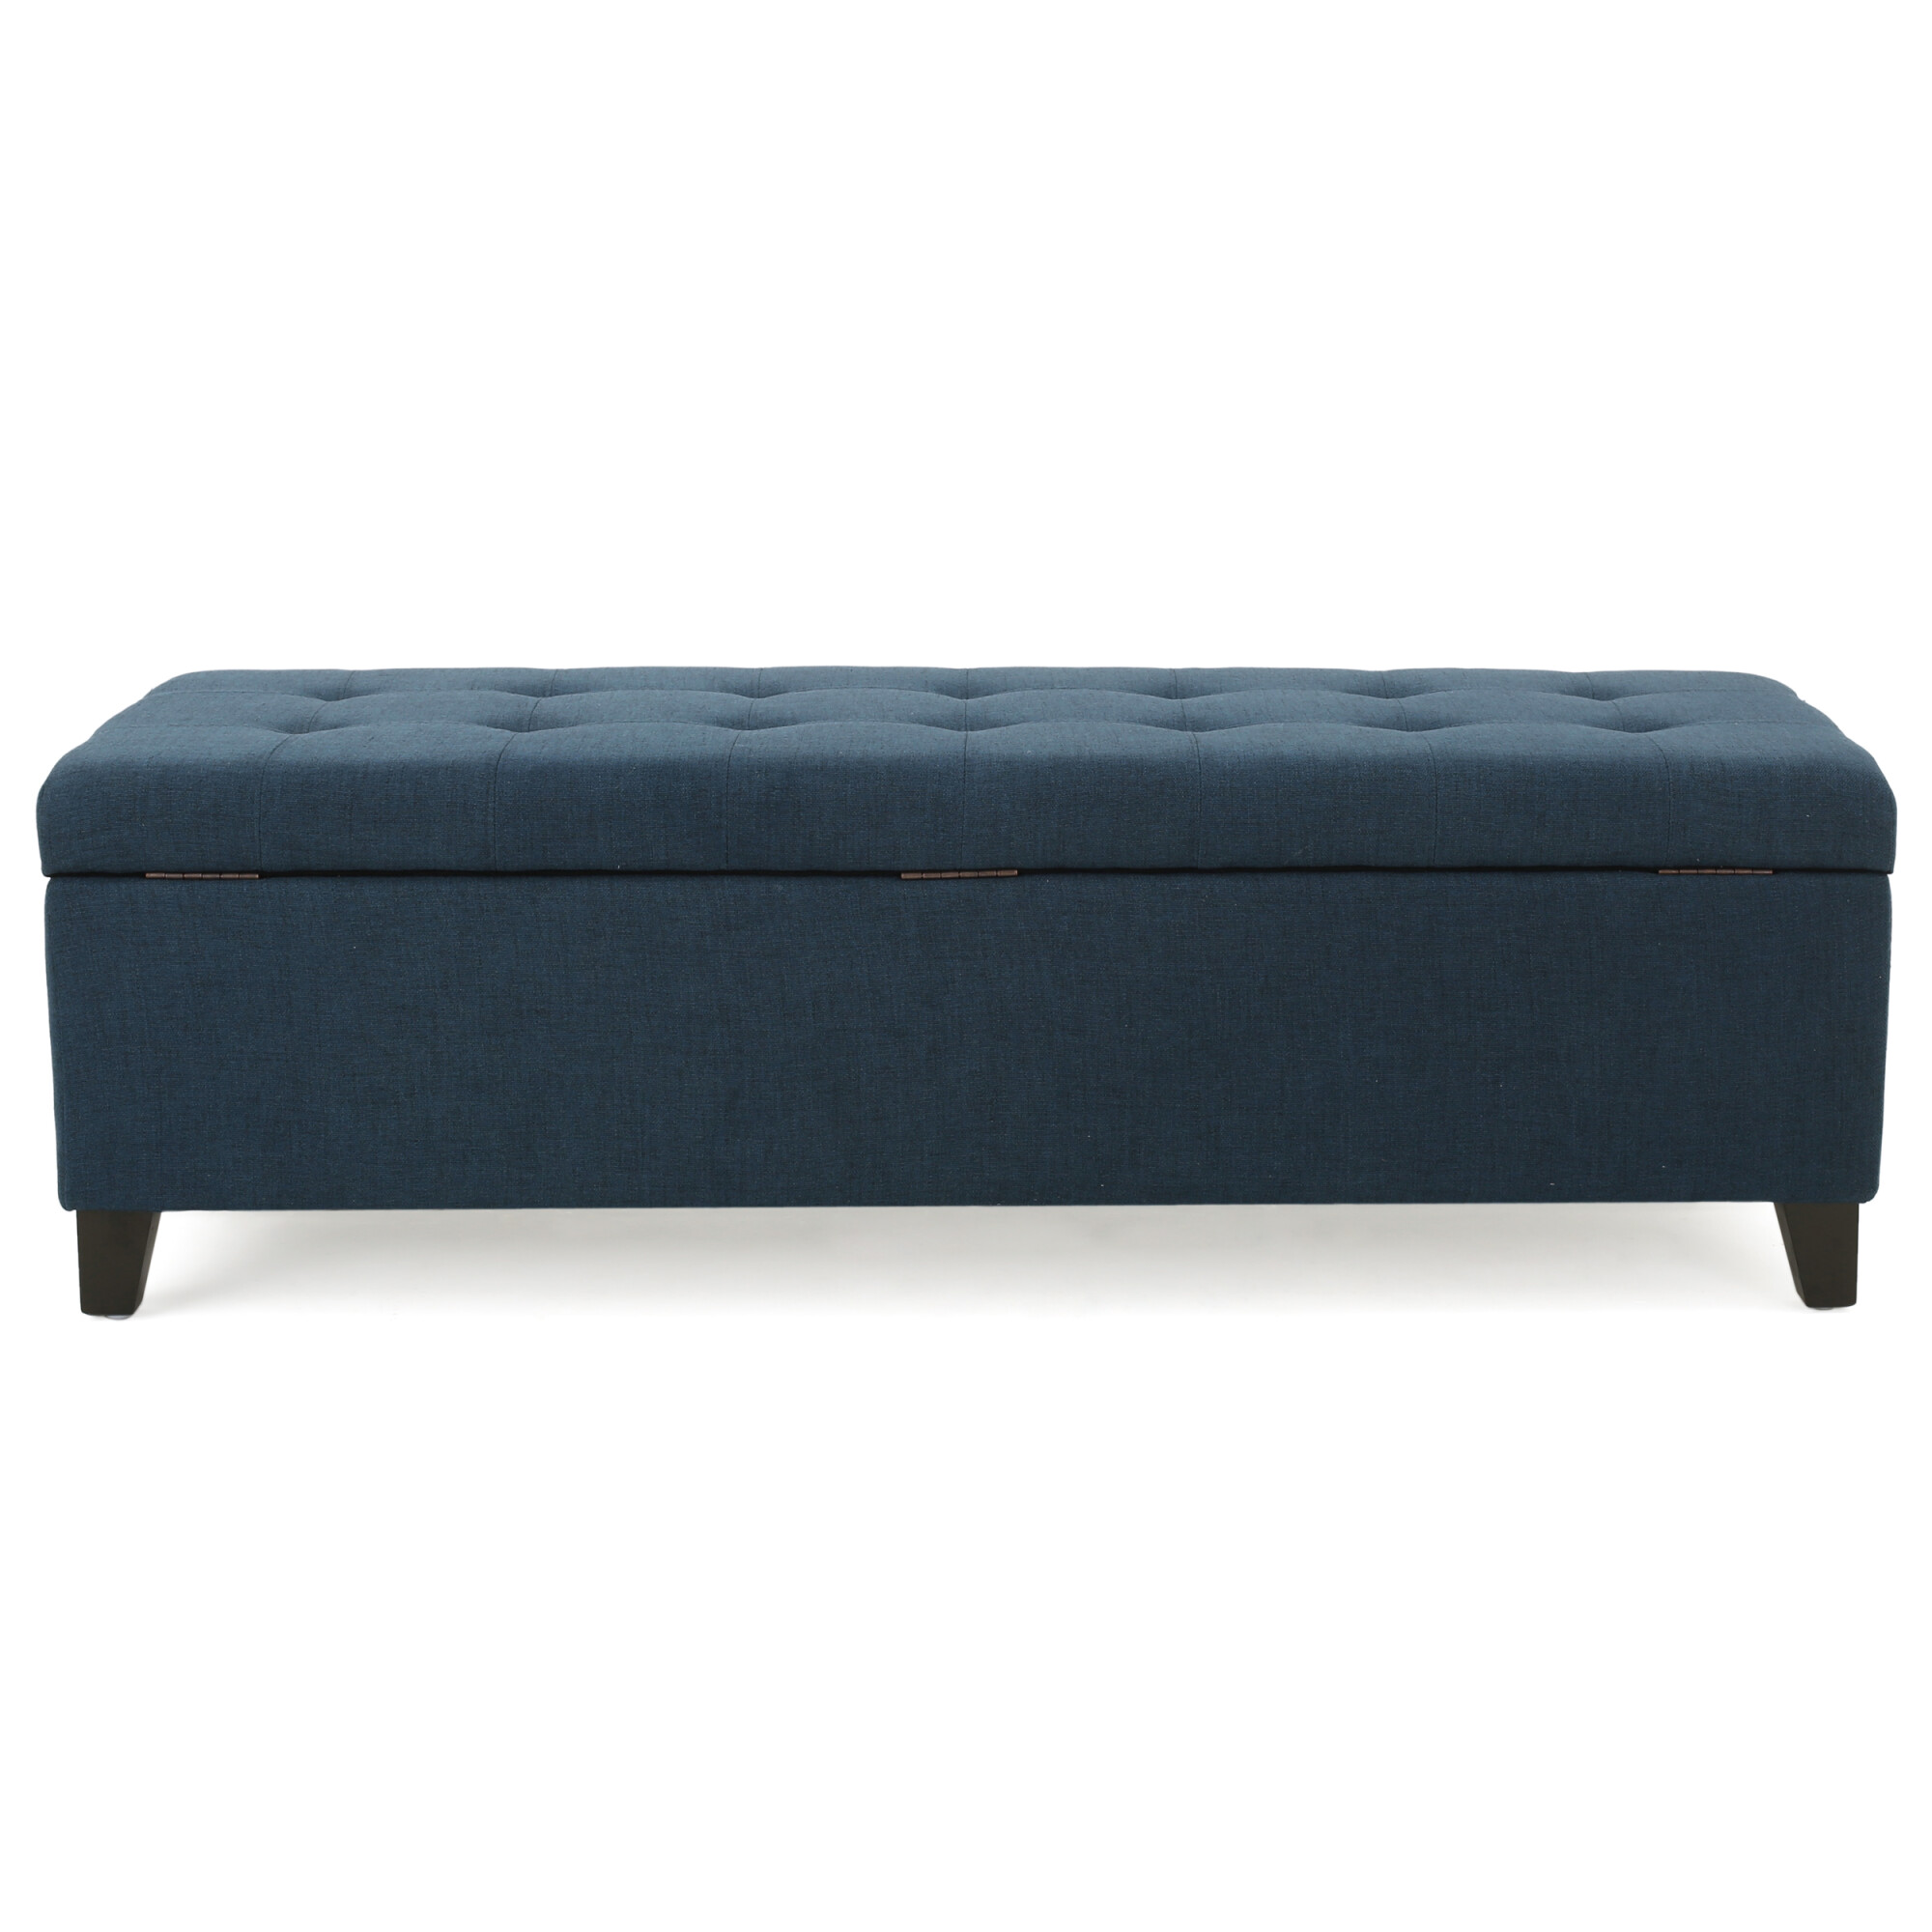 Mission Dark Blue Fabric Storage Ottoman by Noble House